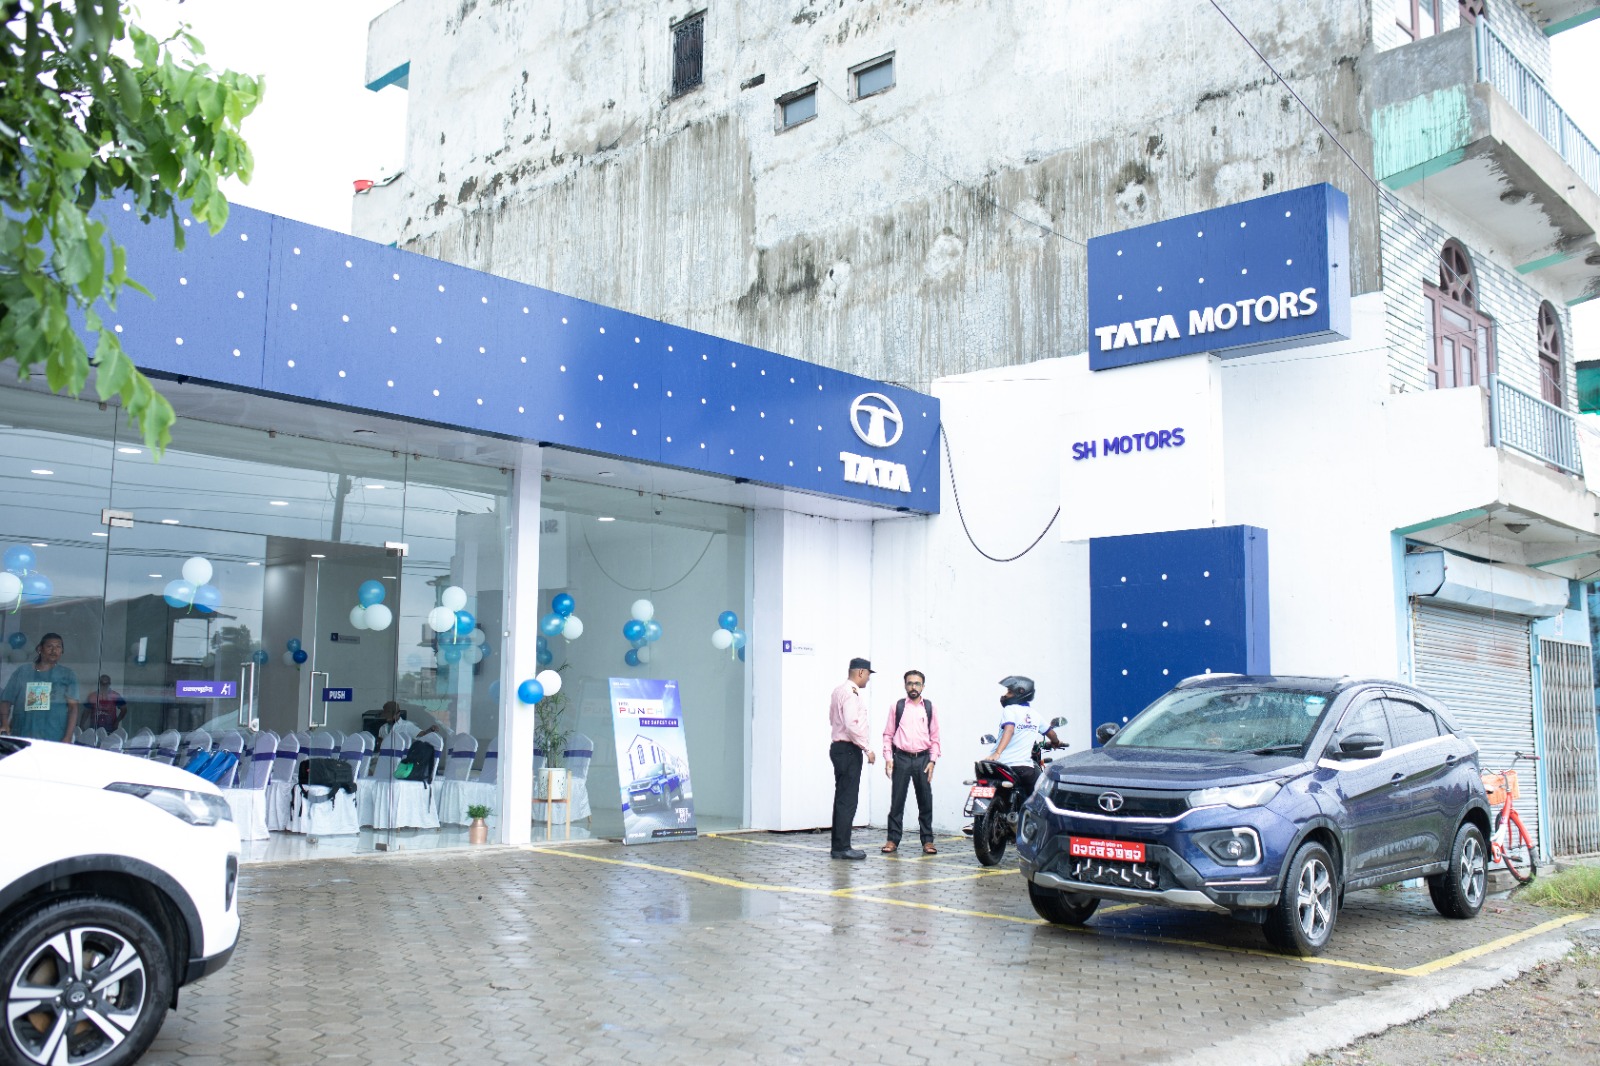 Tiago EV and Punch sales begins from Tata’s new showroom in Chitwan